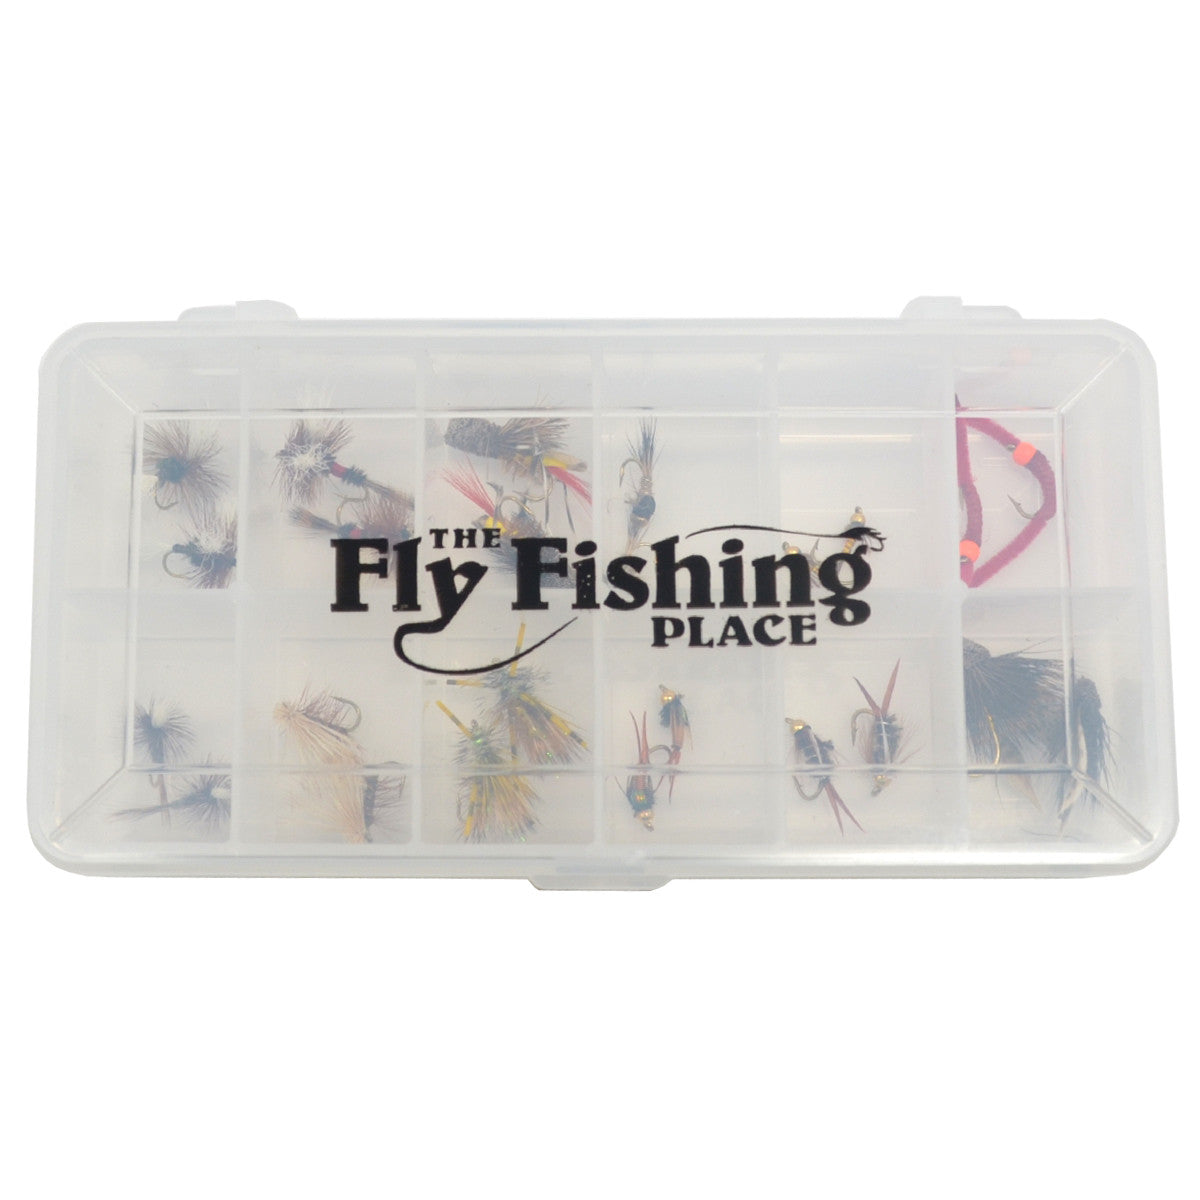 Trout Flies Assortment - 24 Flies for Trout Fly Fishing with Fly Box -  Essential Dry and Wet Fly Selection